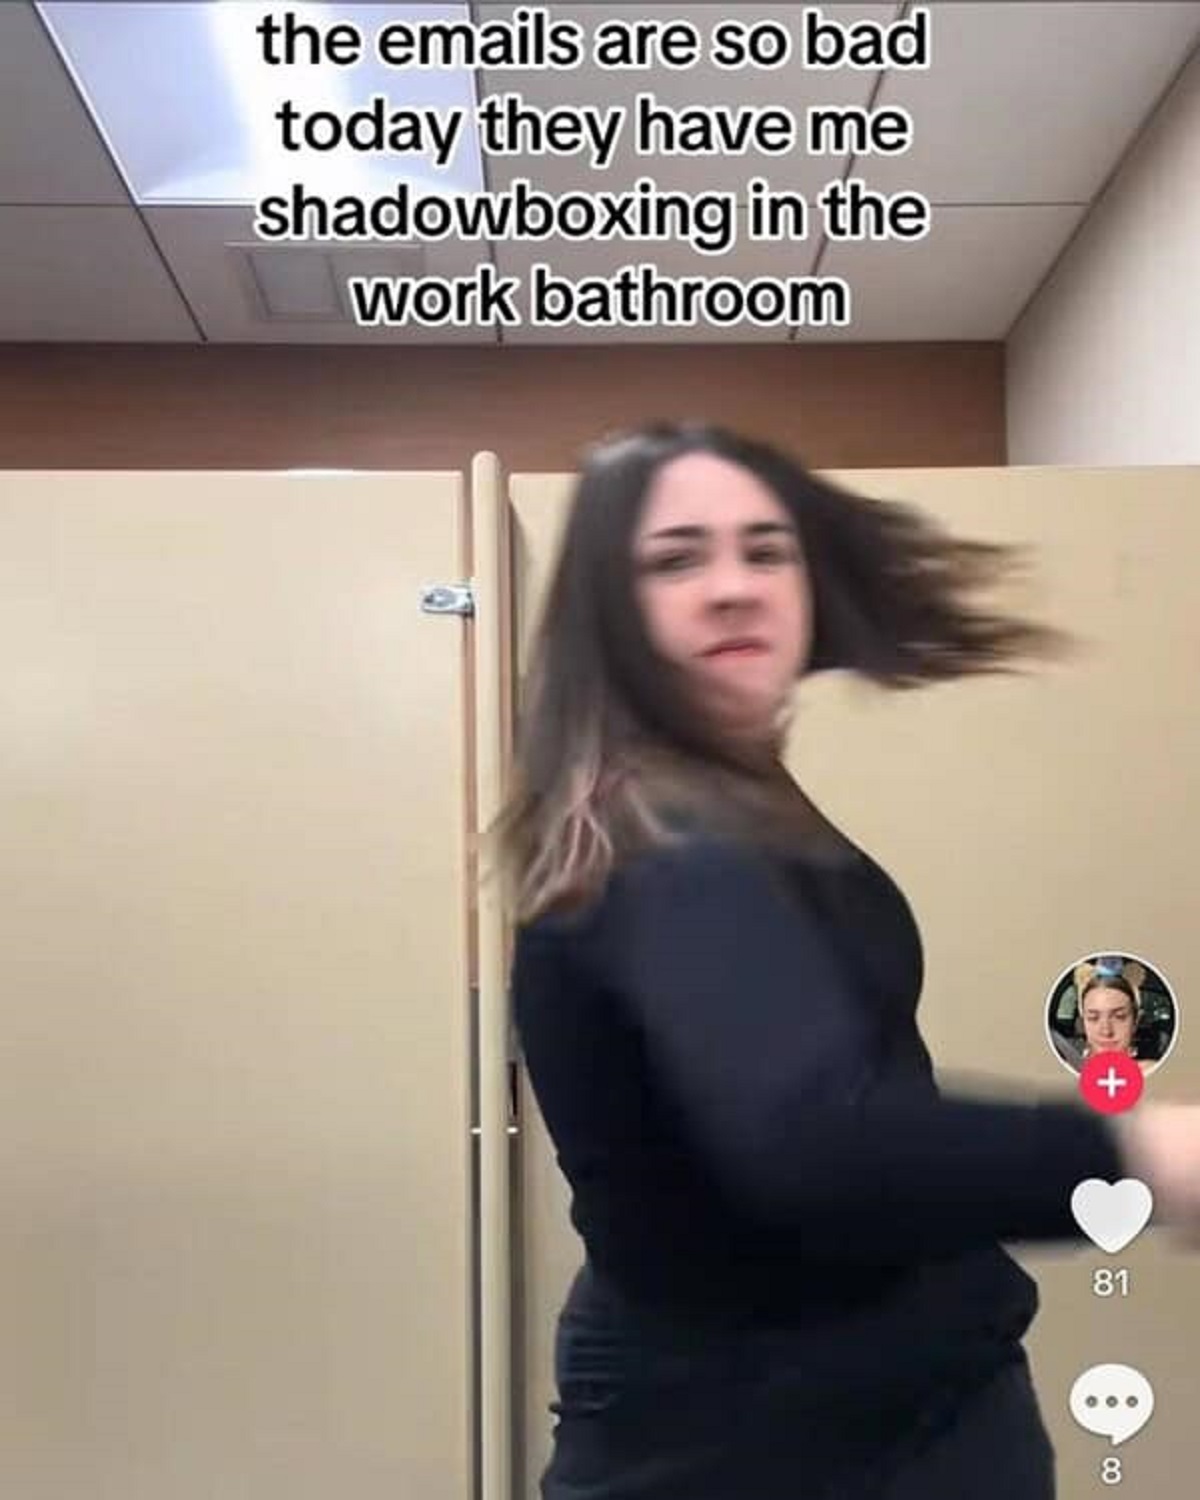 girl - the emails are so bad today they have me shadowboxing in the work bathroom 81 8